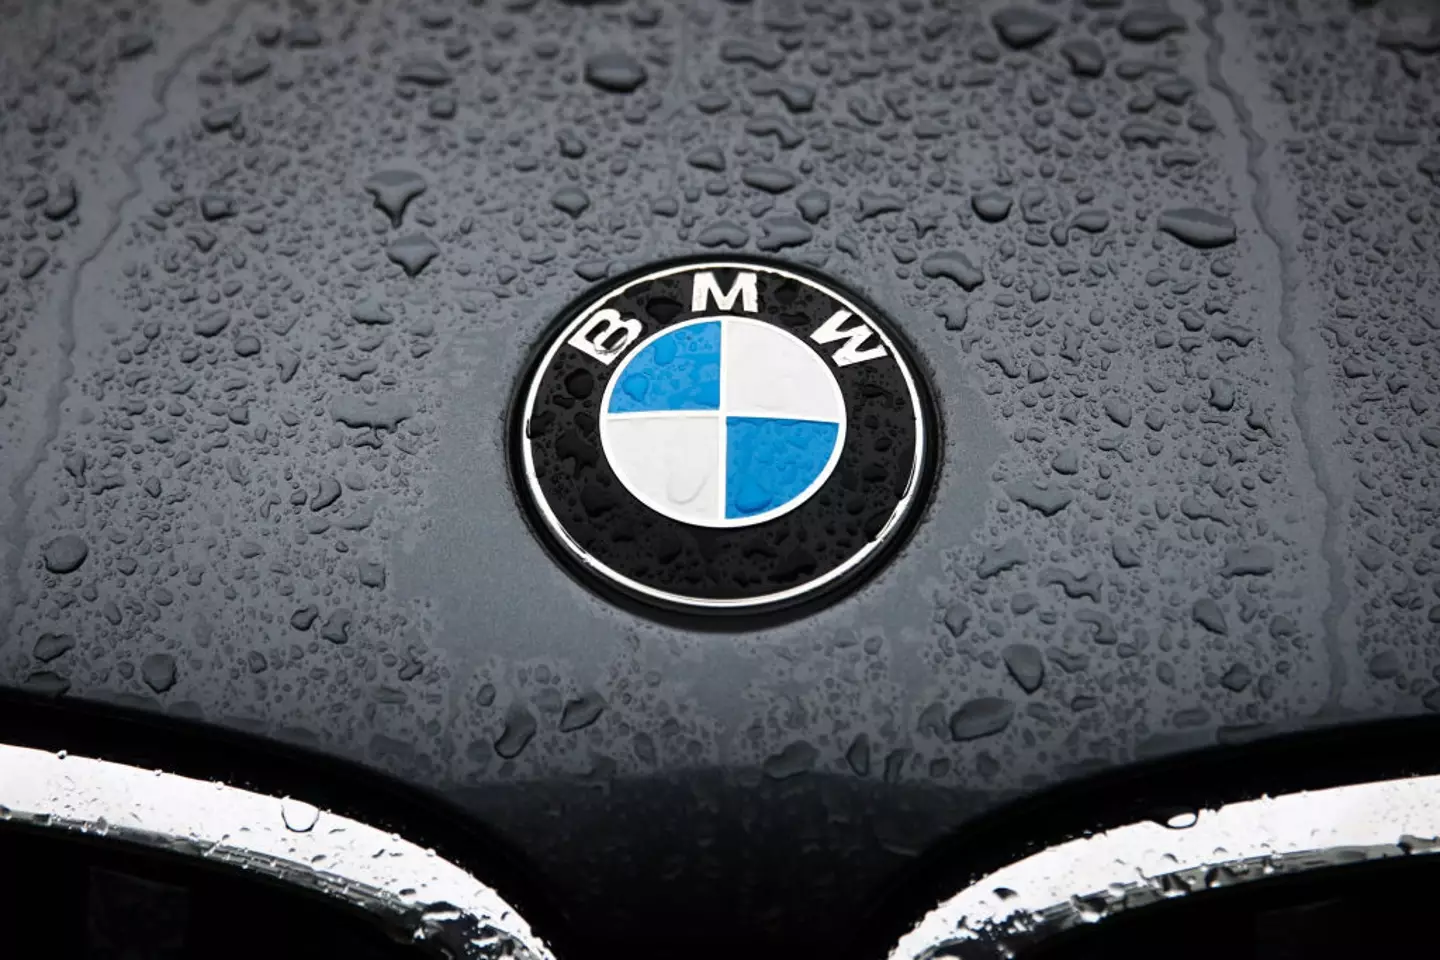 Drivers of BMWs were found to be amongst those most likely to cause a car crash due to reckless driving.